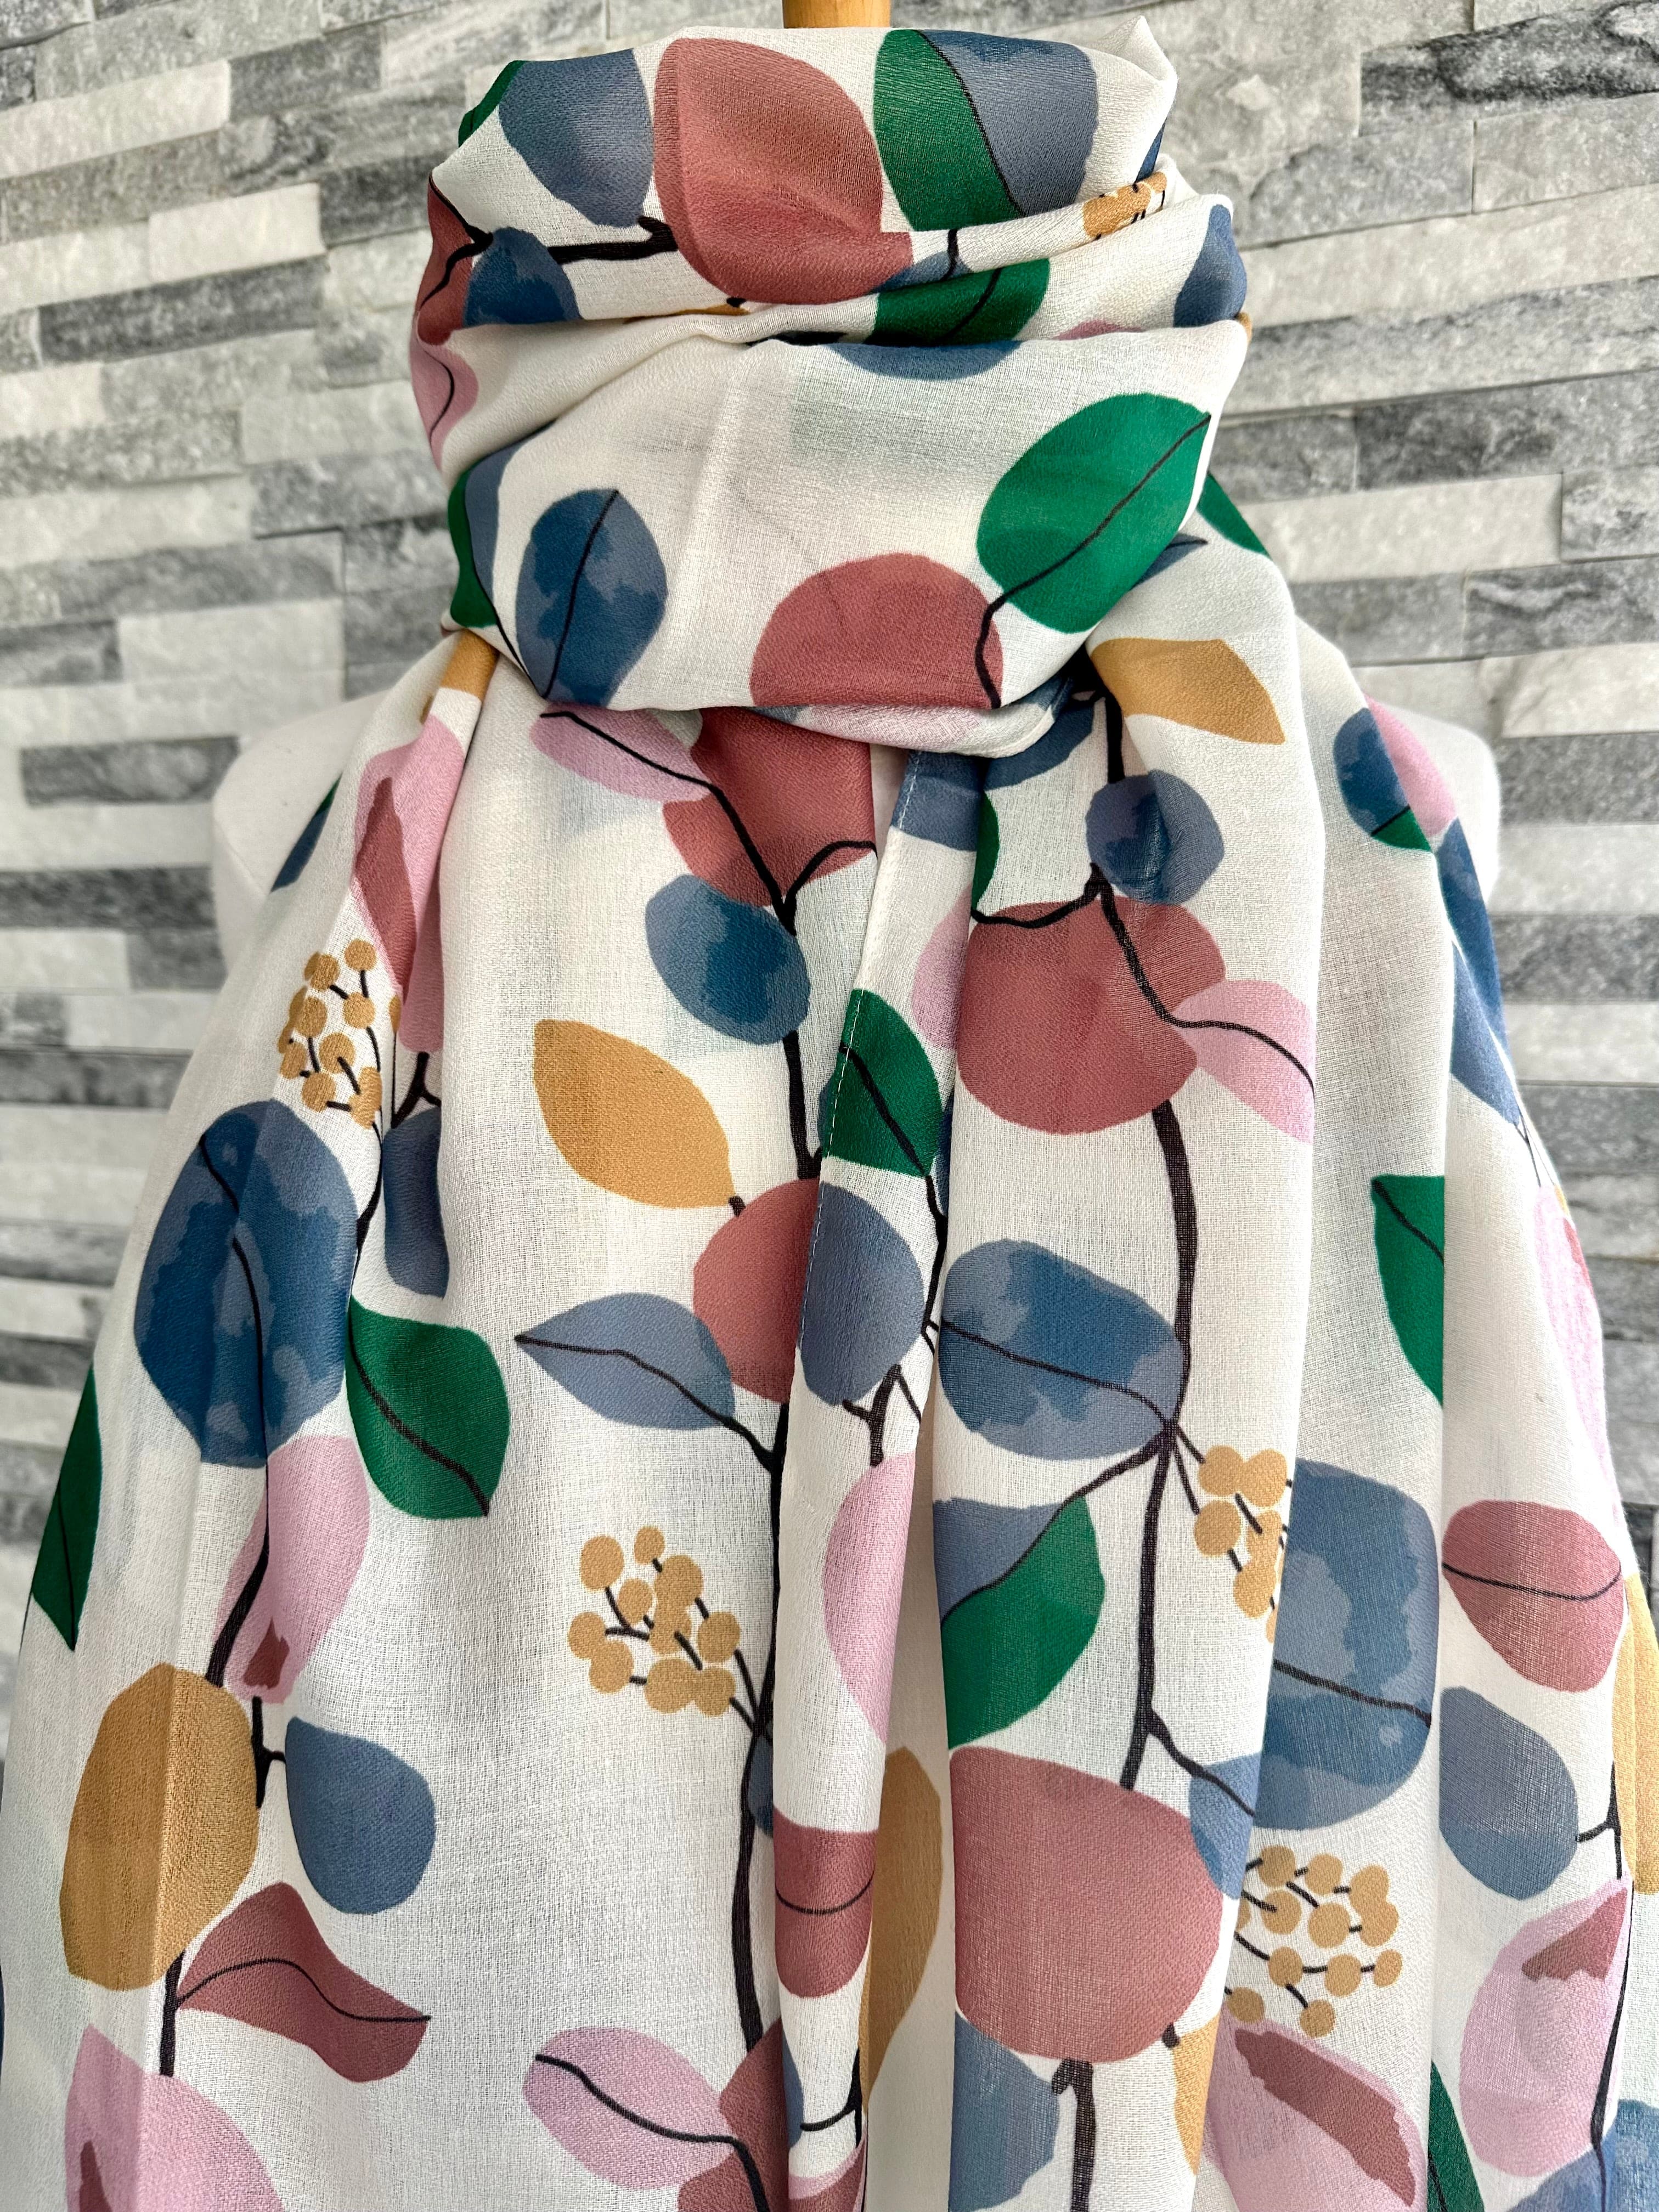 luscious scarves Off White, Blue , Green and Pink Large Leafy Leaves Scarf.